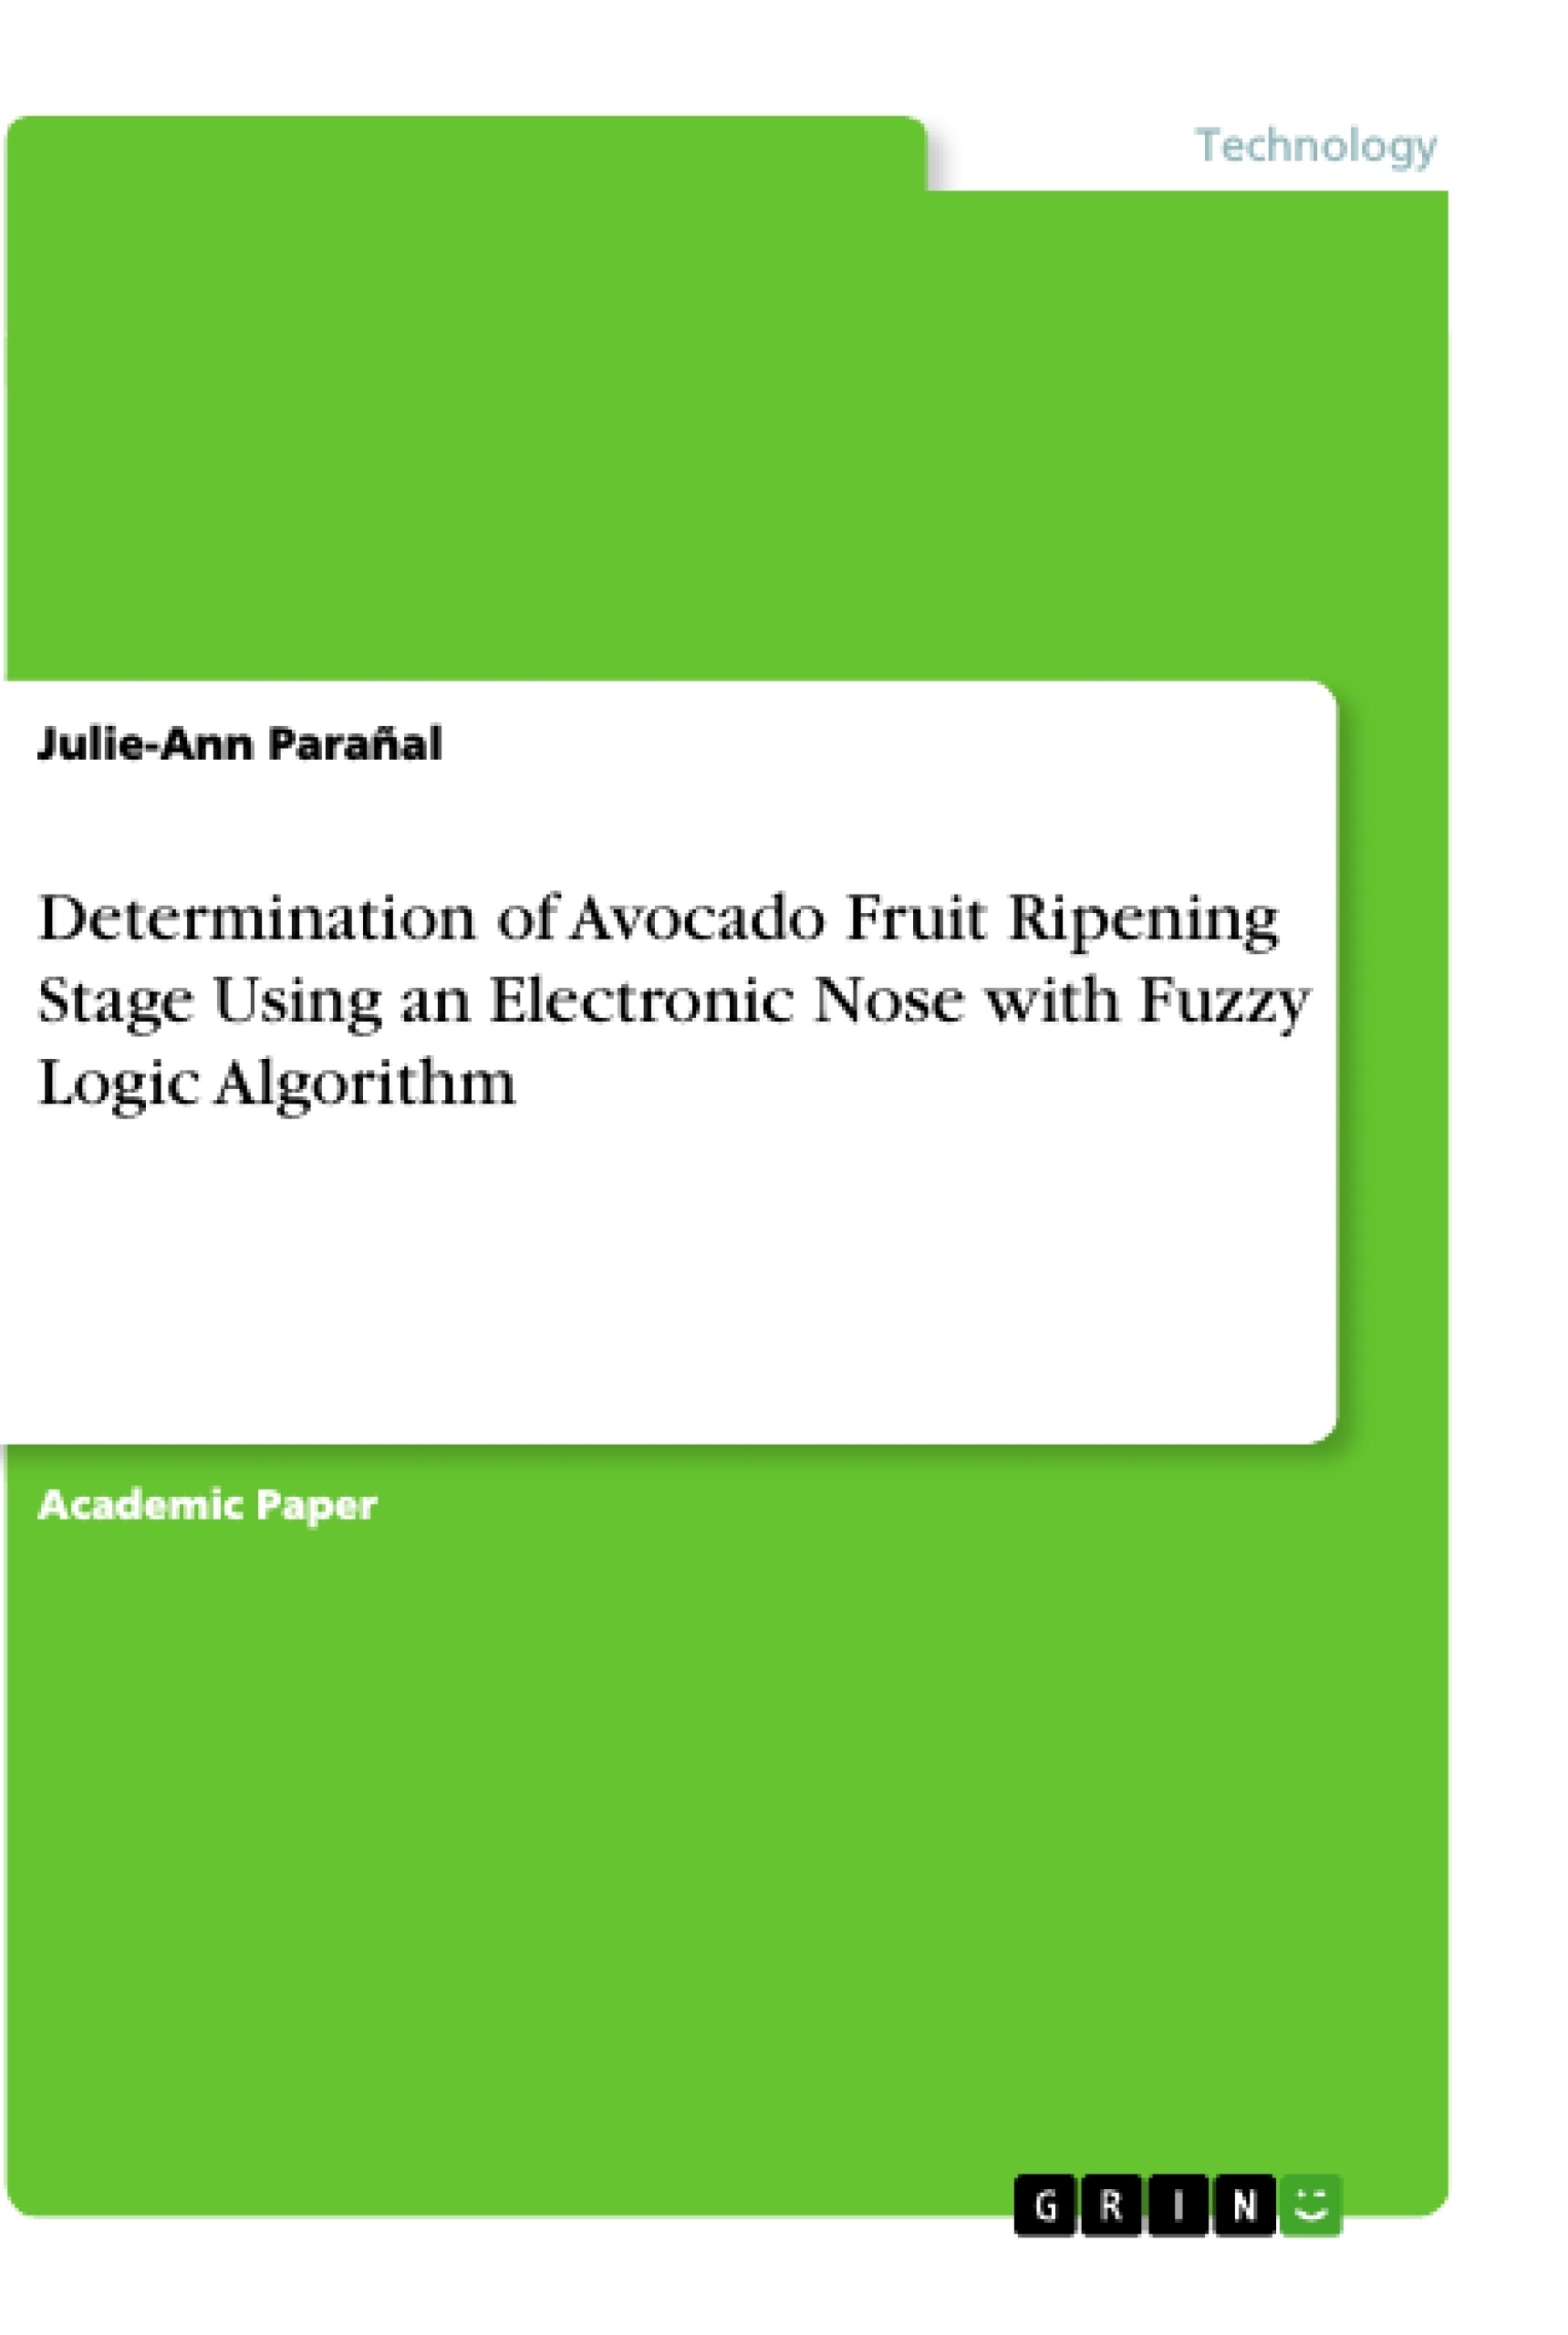 Title: Determination of Avocado Fruit Ripening Stage Using an Electronic Nose with Fuzzy Logic Algorithm